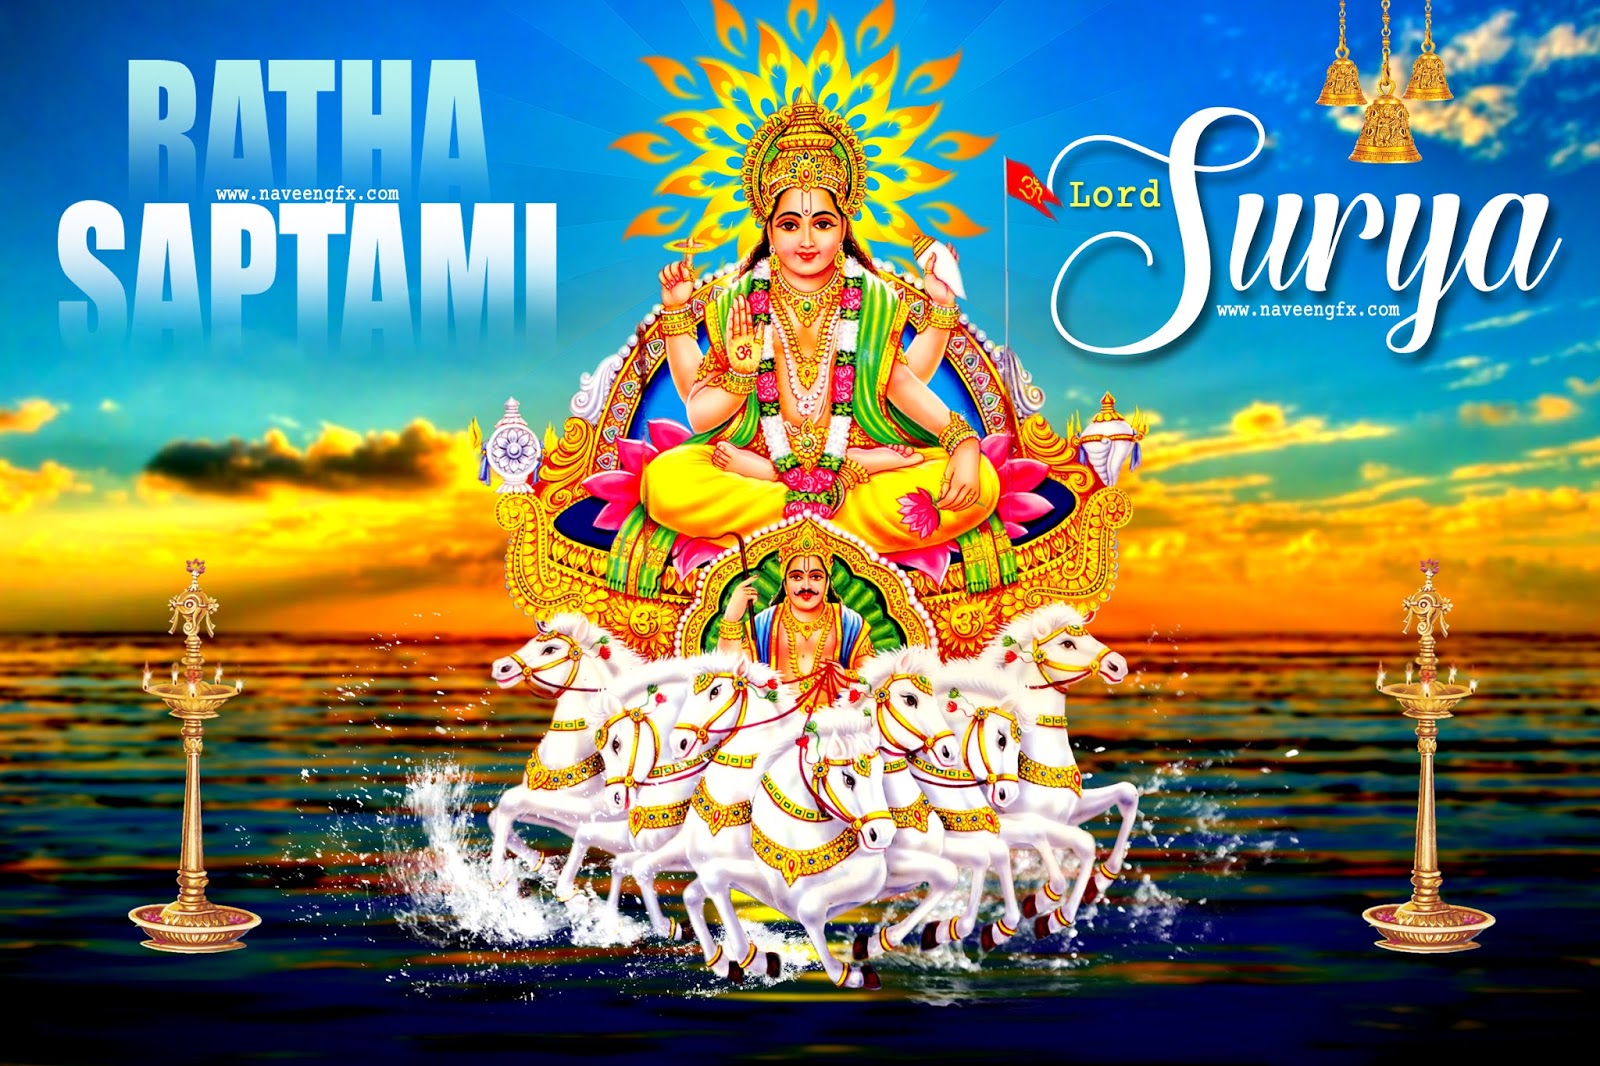 Lord Surya , HD Wallpaper & Backgrounds